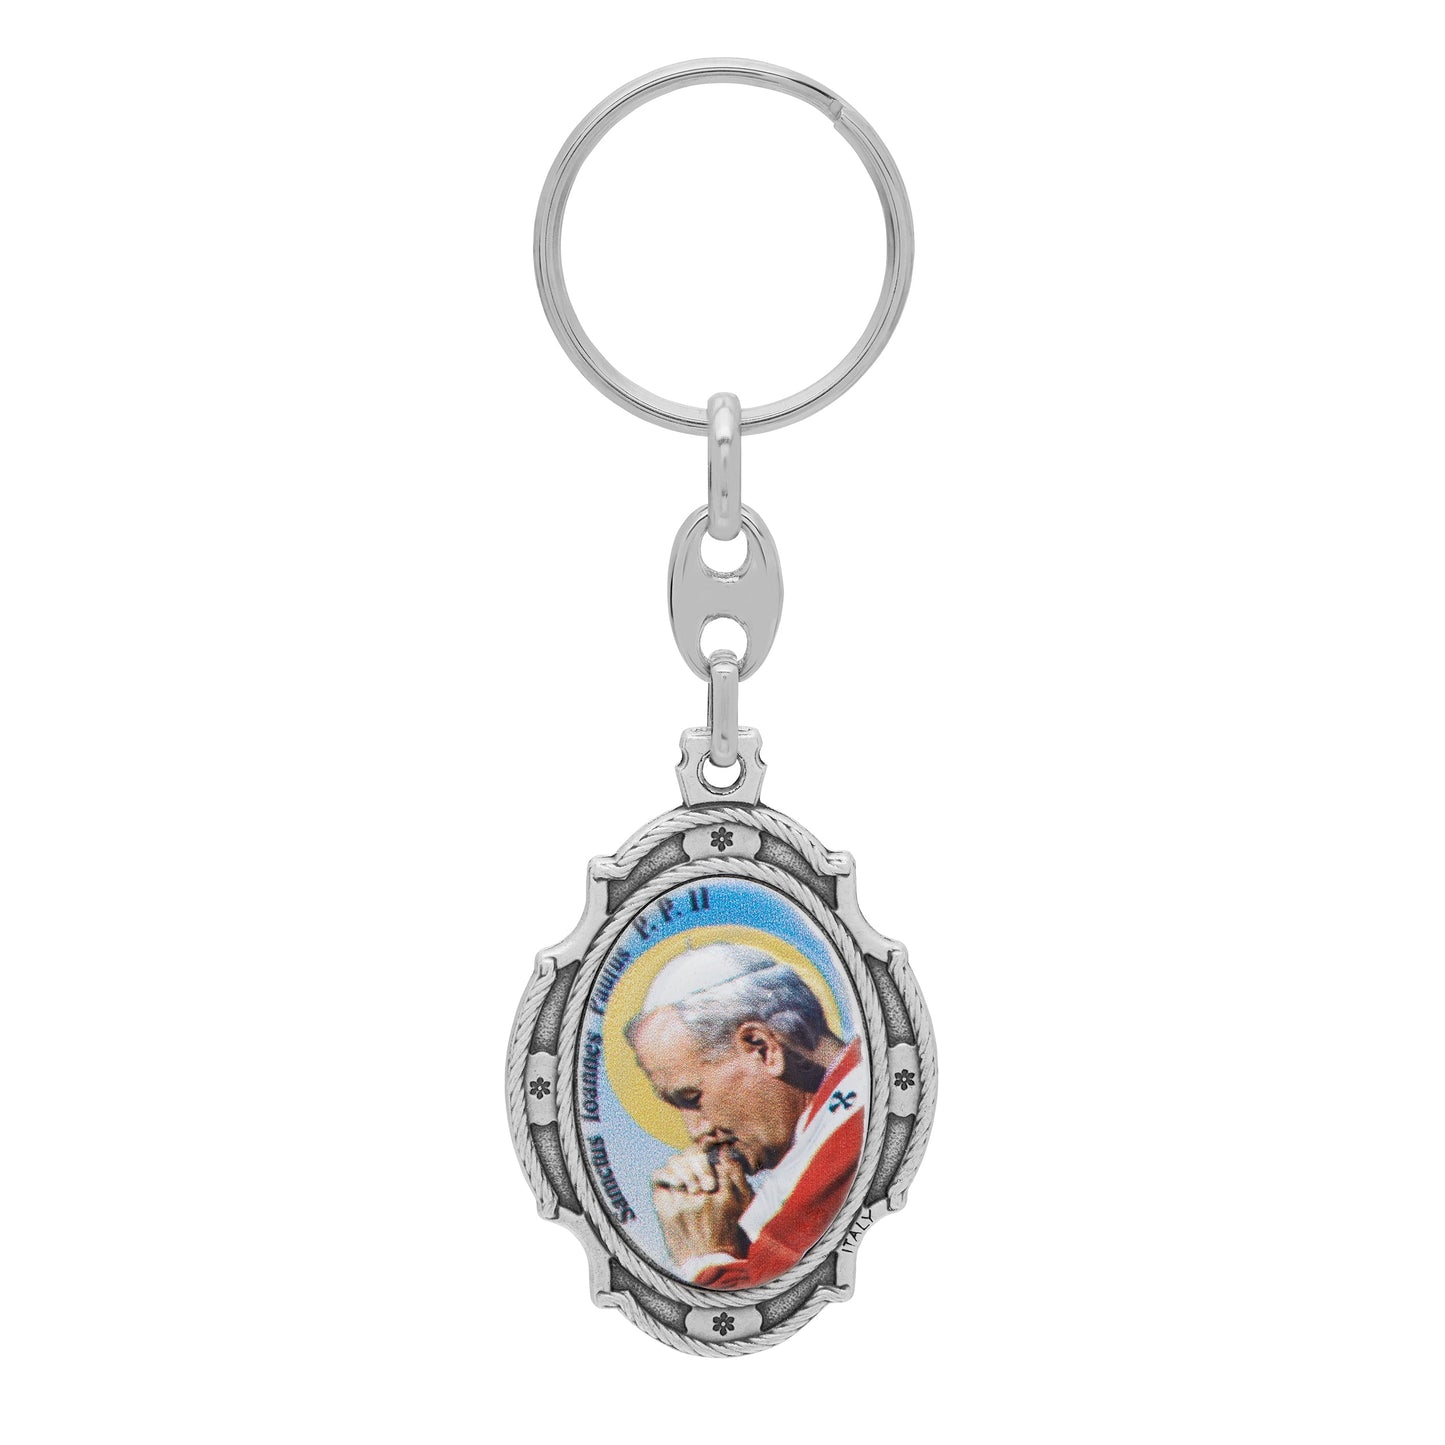 Mondo Cattolico Keychains Oval Colored Metal Keychain With Worked Frame of Pope St. John Paul II